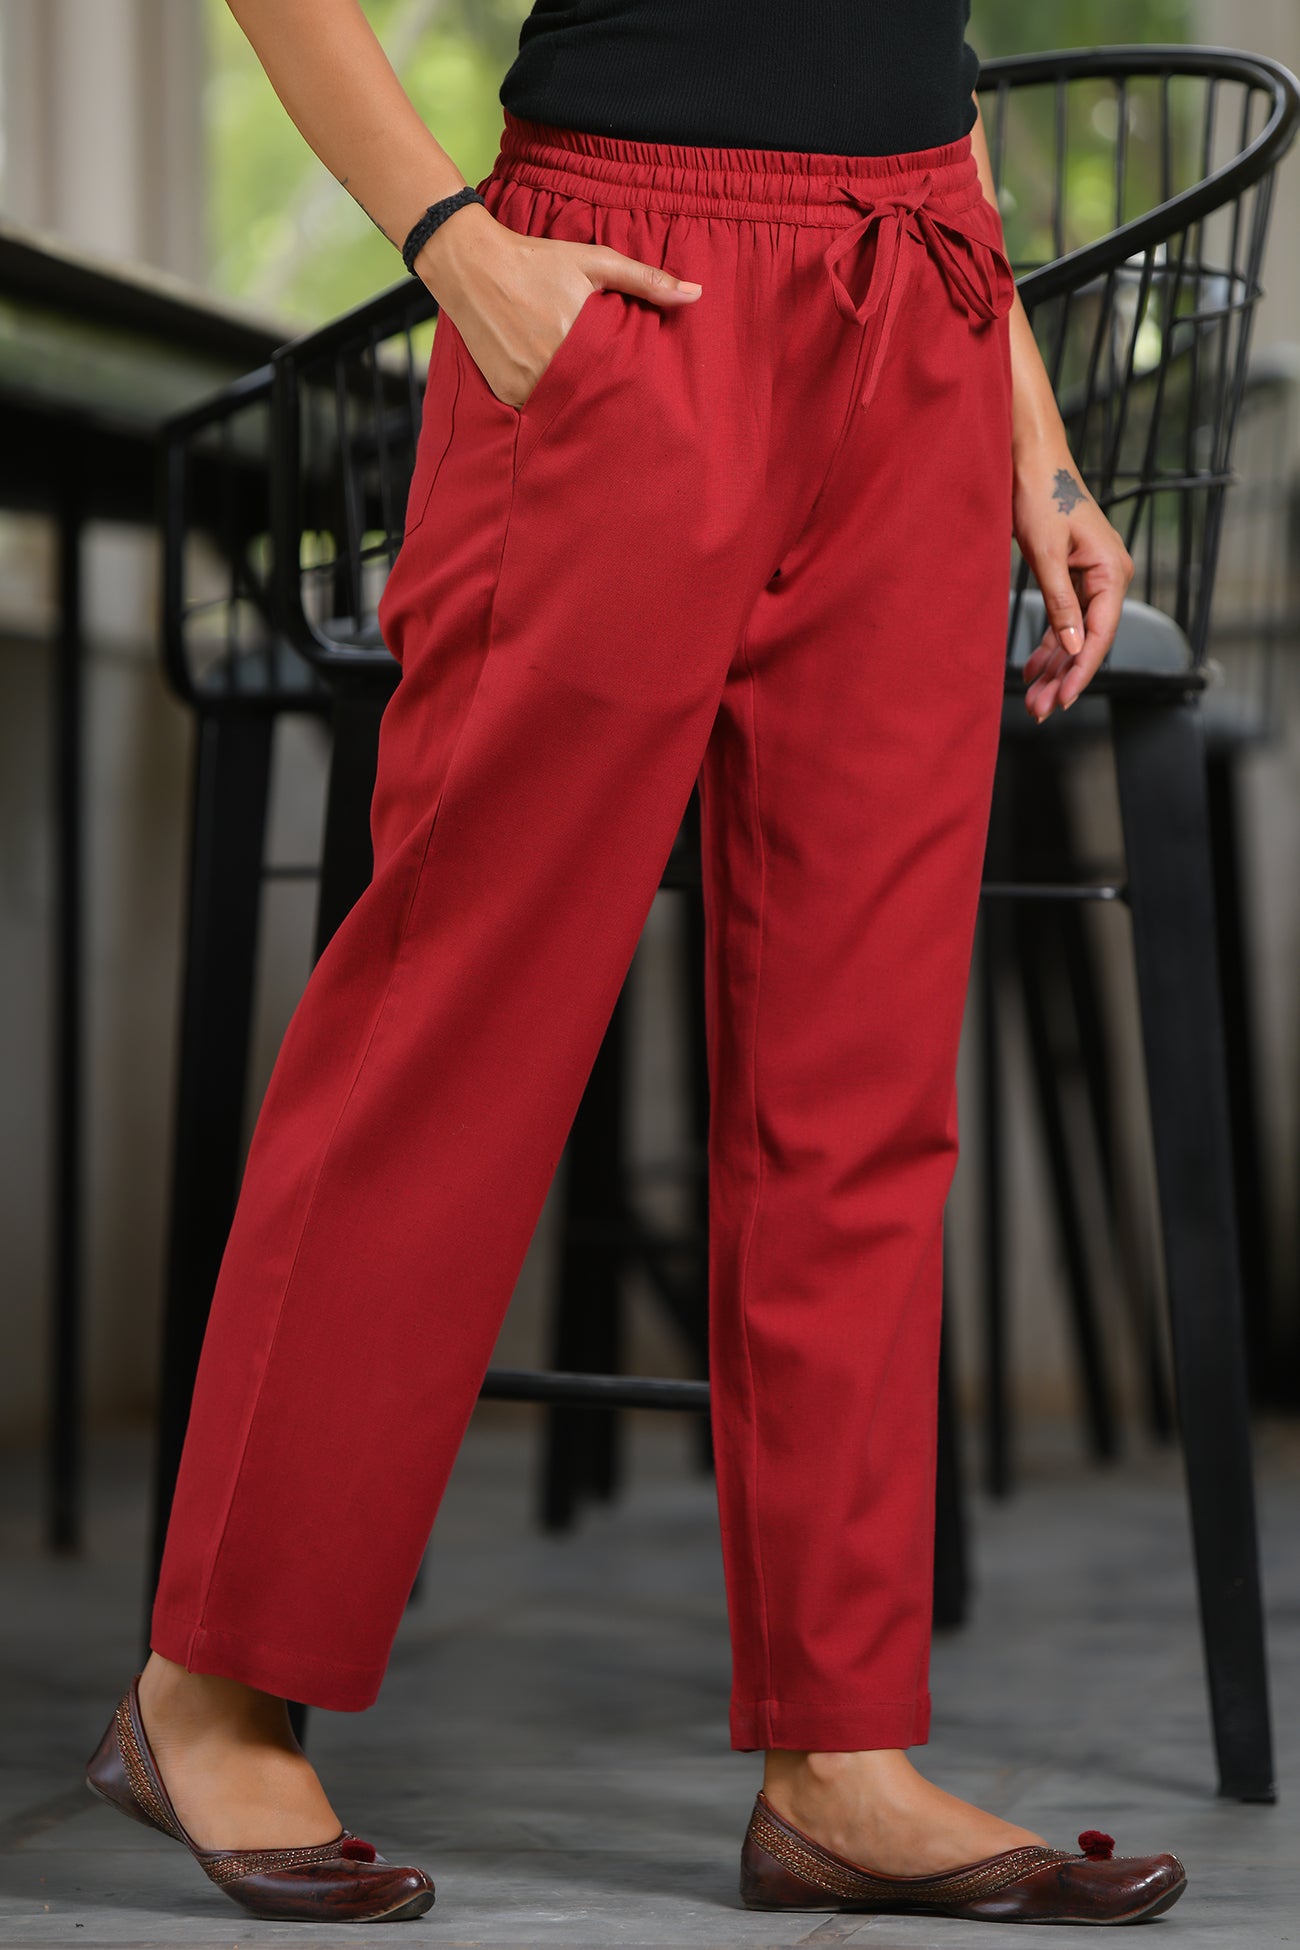 Get Red Checkered Pants at ₹ 680 | LBB Shop